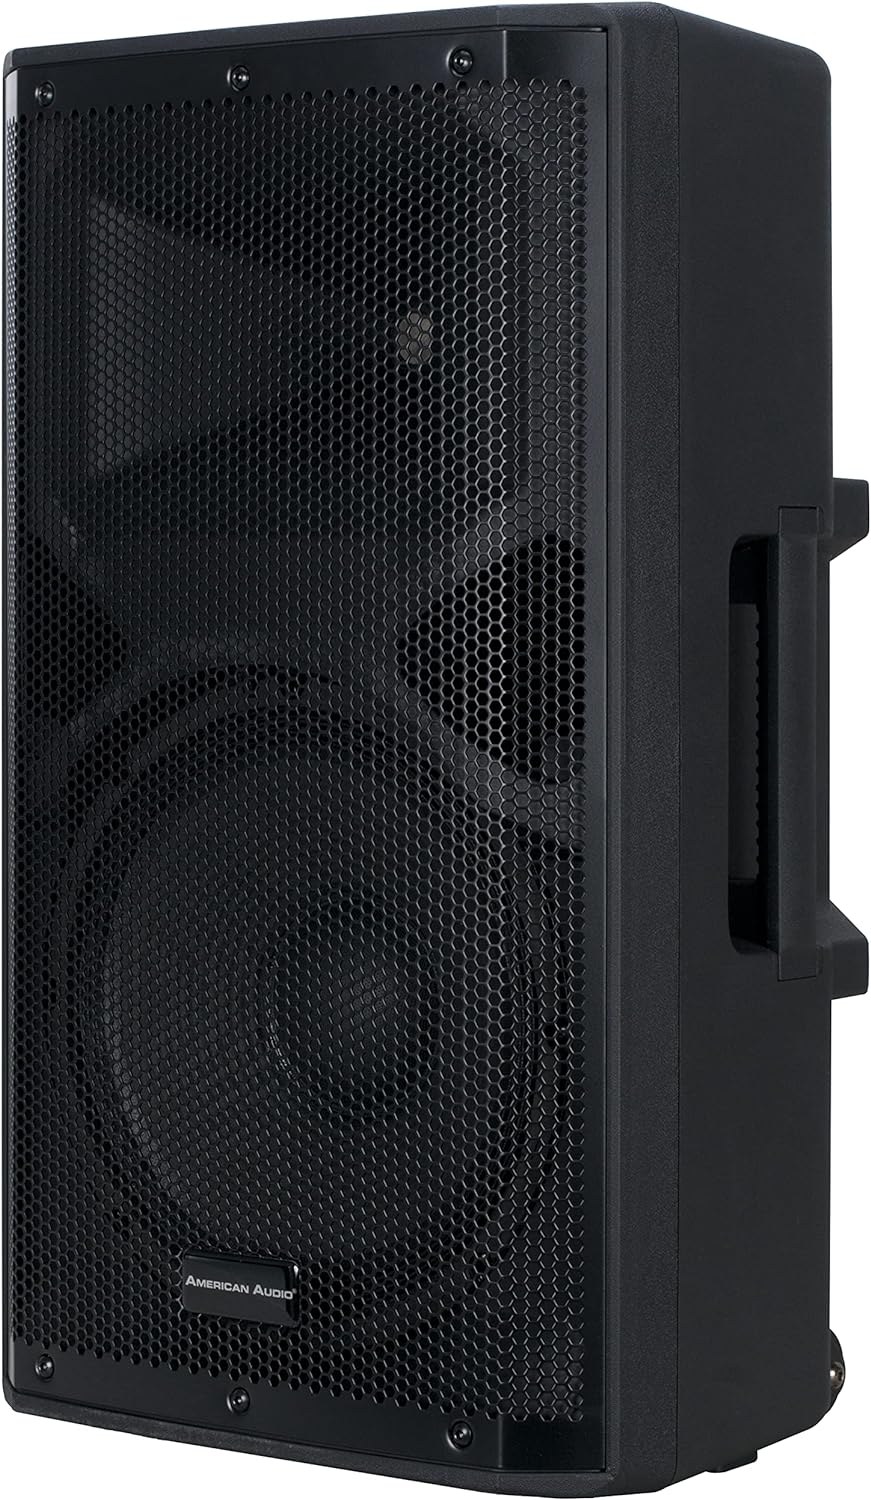 American Audio APX12 GO BT, Battery Powered 200W Active Loudspeaker (12 Inch)